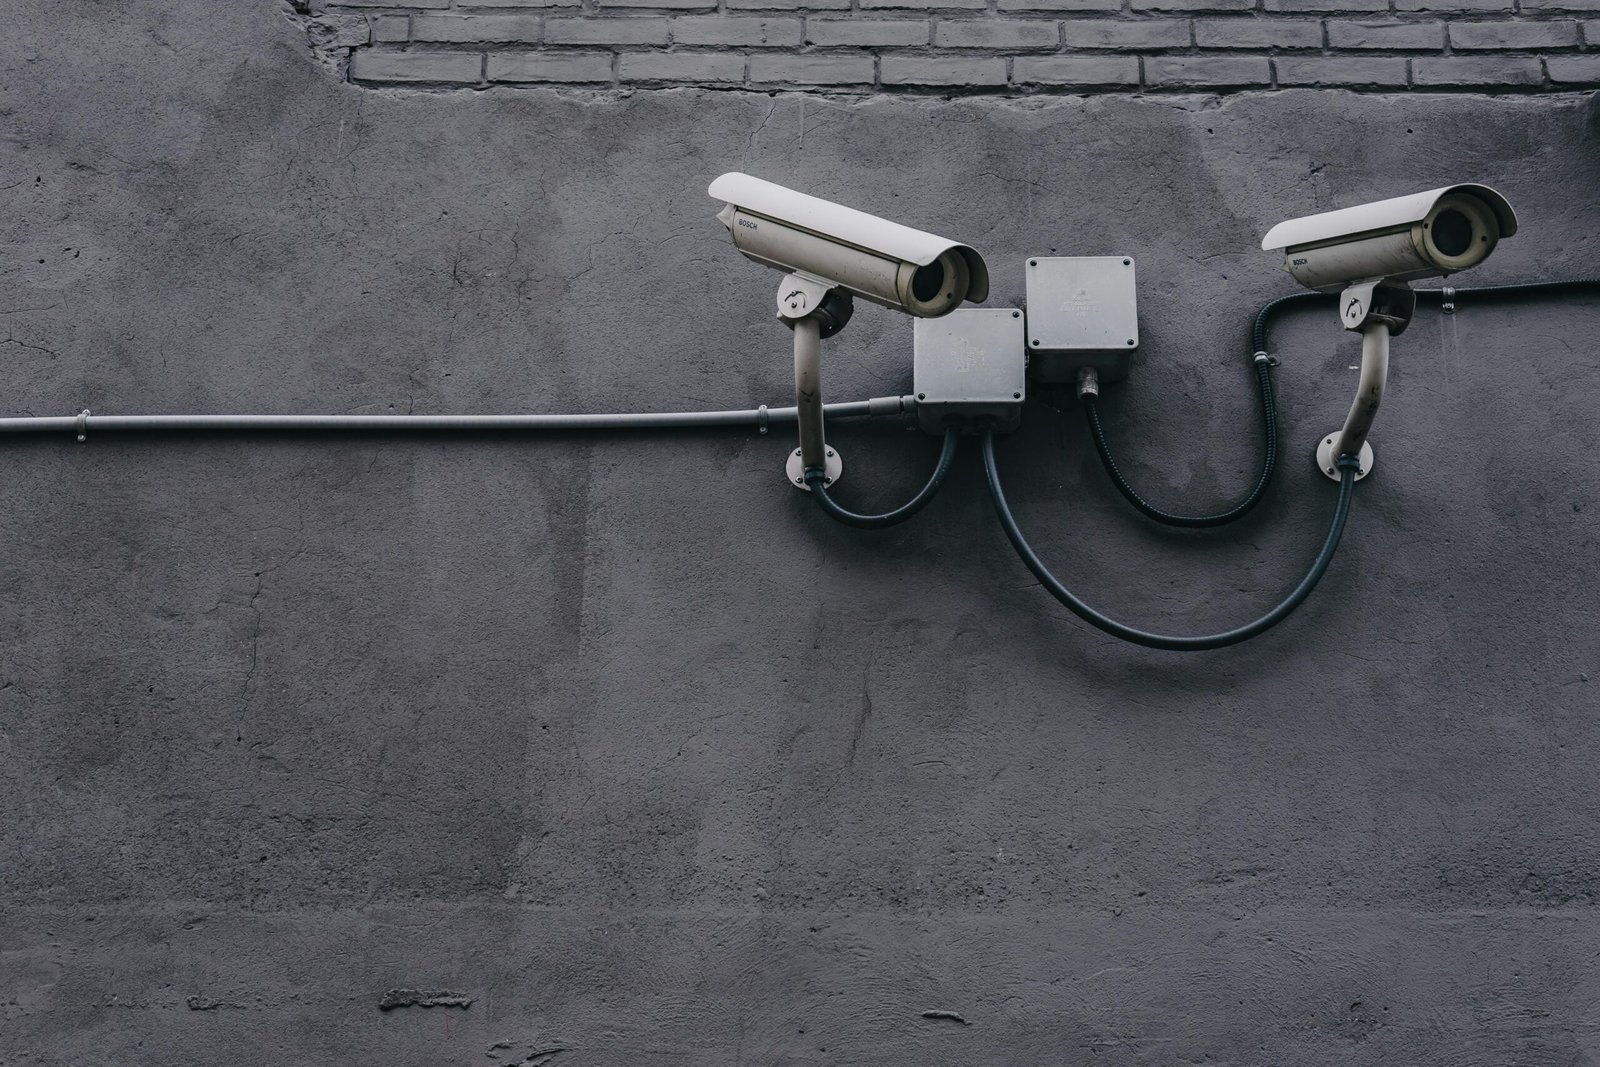 2 CCTV cameras mounted on a wall